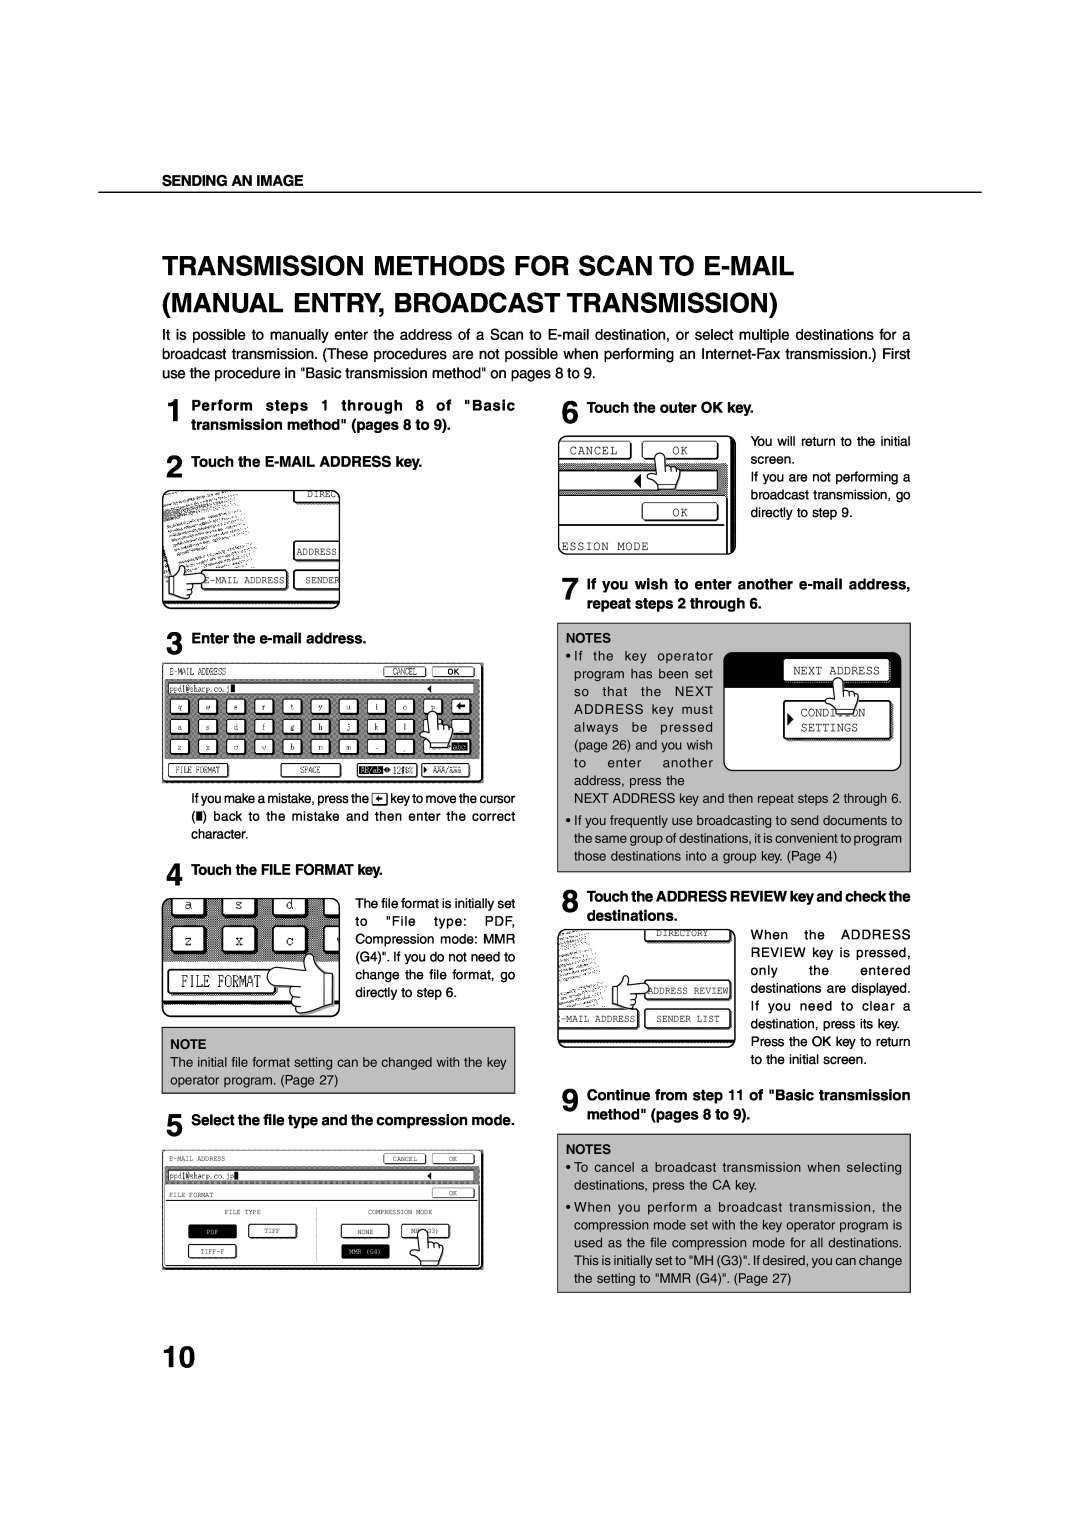 Sharp 4501 Sending An Image, Perform steps 1 through 8 of Basic transmission method pages 8 to, Touch the outer OK key 